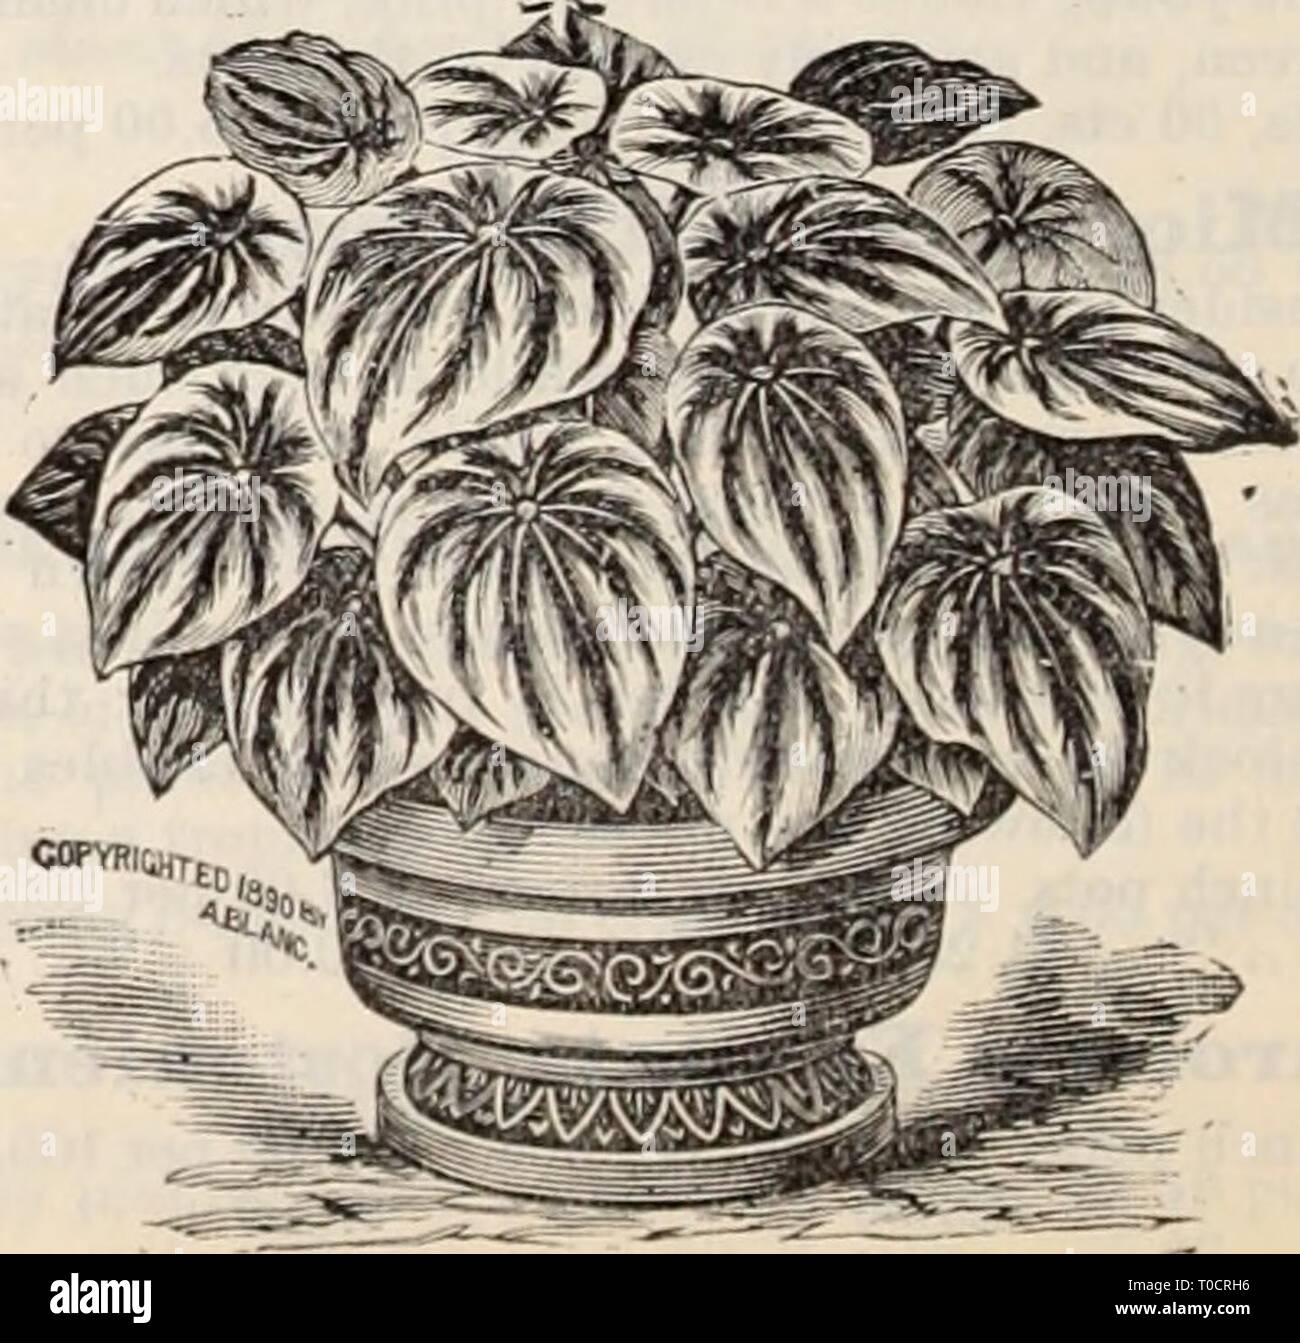 Dreer's wholesale price list  Dreer's wholesale price list / Henry A. Dreer. dreerswholesalep1898dree Year:   Lastbea Aristata Variegata. General Collection of Ferns.—Continued. Inch pots Per 100 Per 1000 Sitalobium Cicutarium 2^ $6 00 Selaginella Emilleana 2 4 00 •' ' 3 6 00 ' Wildenowi 3 6 00 Pandanns Veitchii. Good plants in 6 inch pots, $1.25 each. Peperomia Maculosa. 2i inch pots, 75 cts. per doz.; $6.00 per 100. Peperomia Metallica. 2^ inch pots, 75 cts. per doz.; §6.00 per 100. Two New Russelias. The Russelias are useful basket or vase plants, of grace- ful drooping habit, producing fre Stock Photo